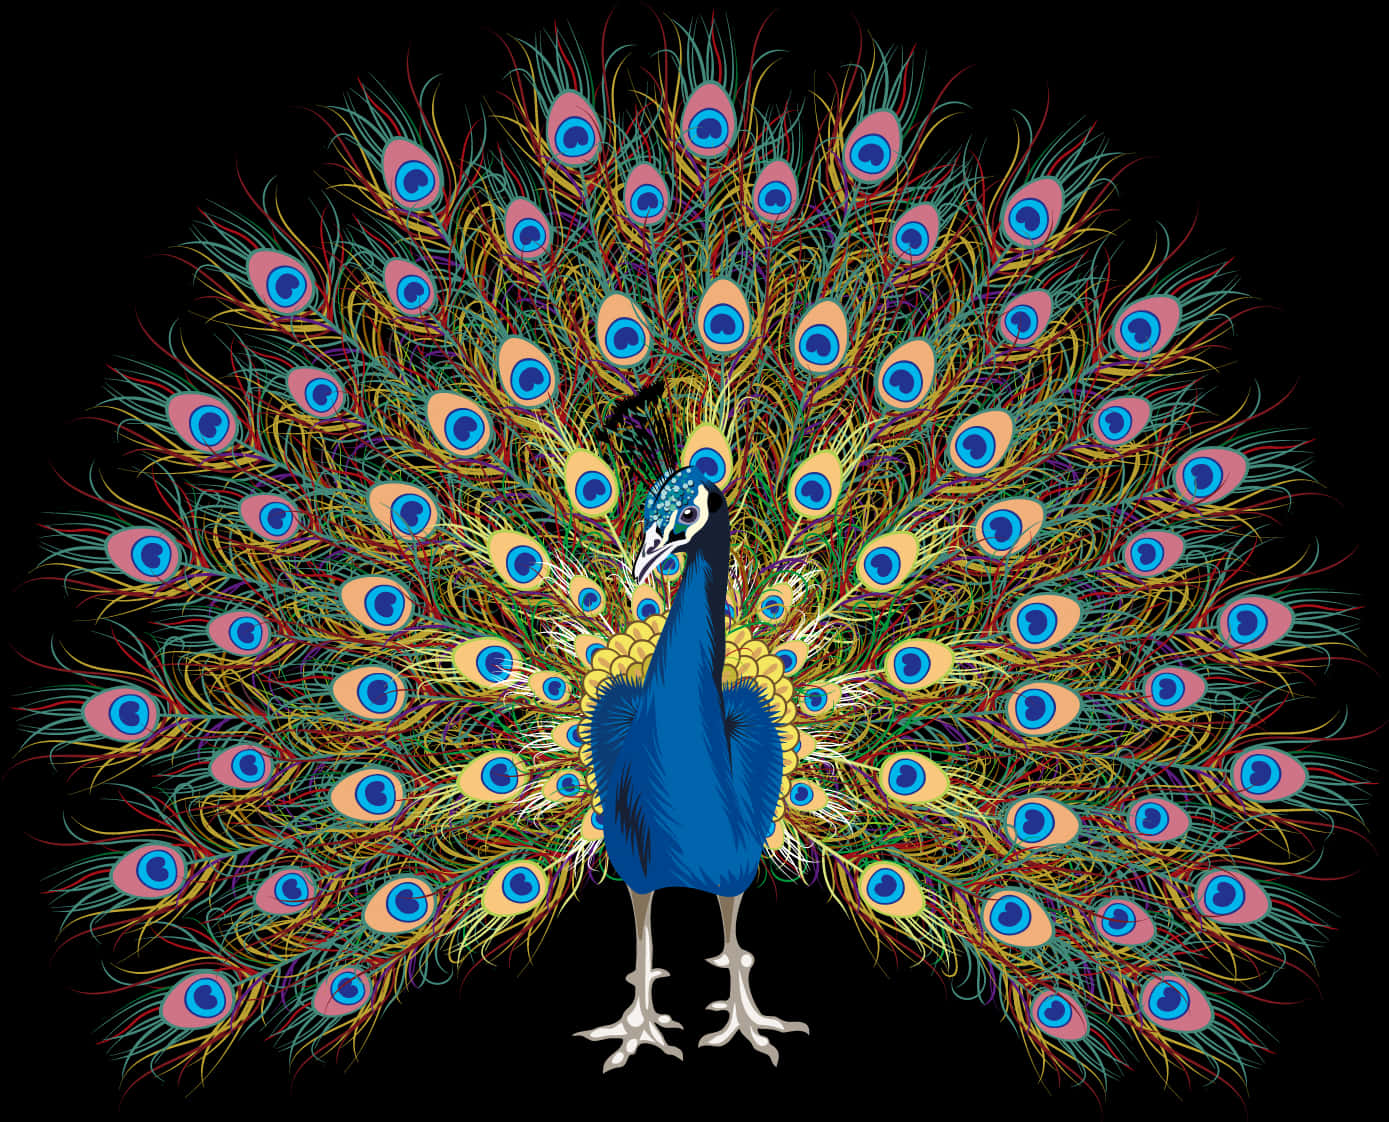 A Peacock With Colorful Feathers